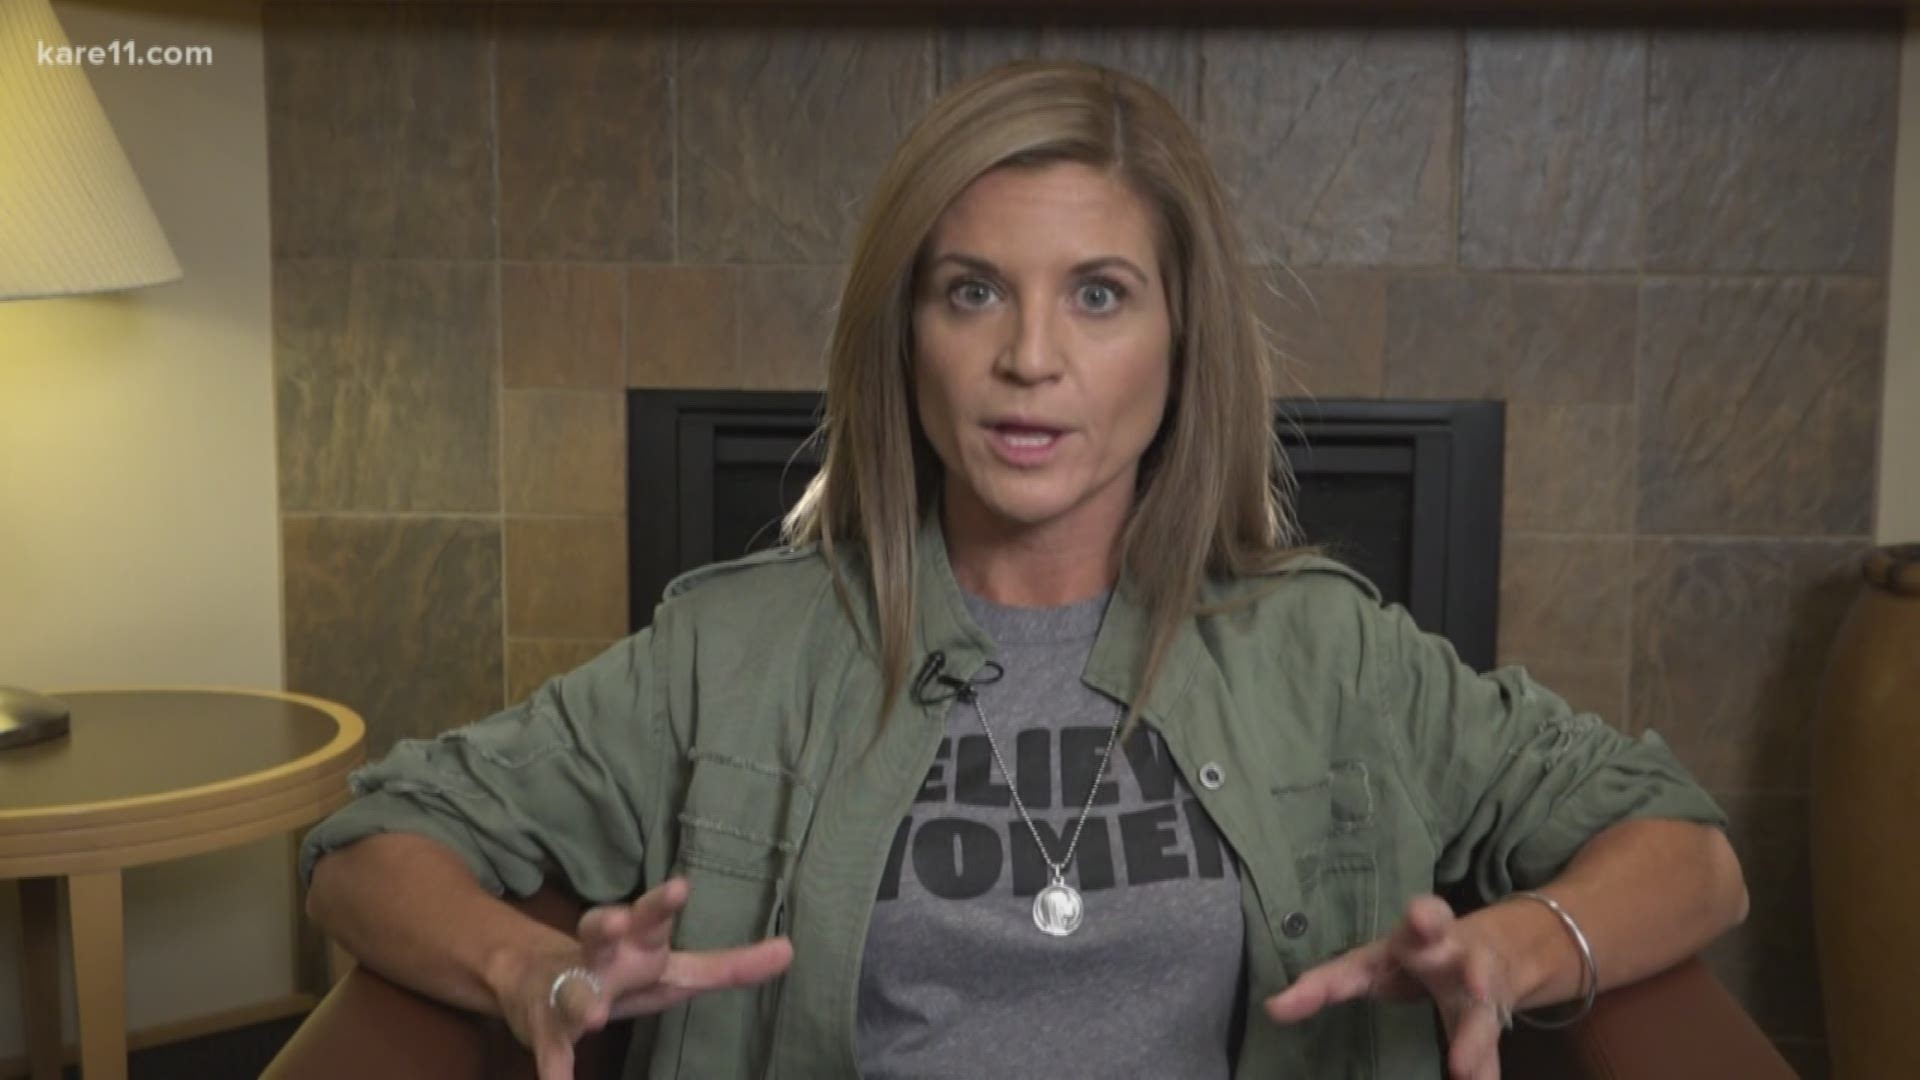 Glennon Doyle, author of "Love Warrior" and several other books, shares some words of wisdom.